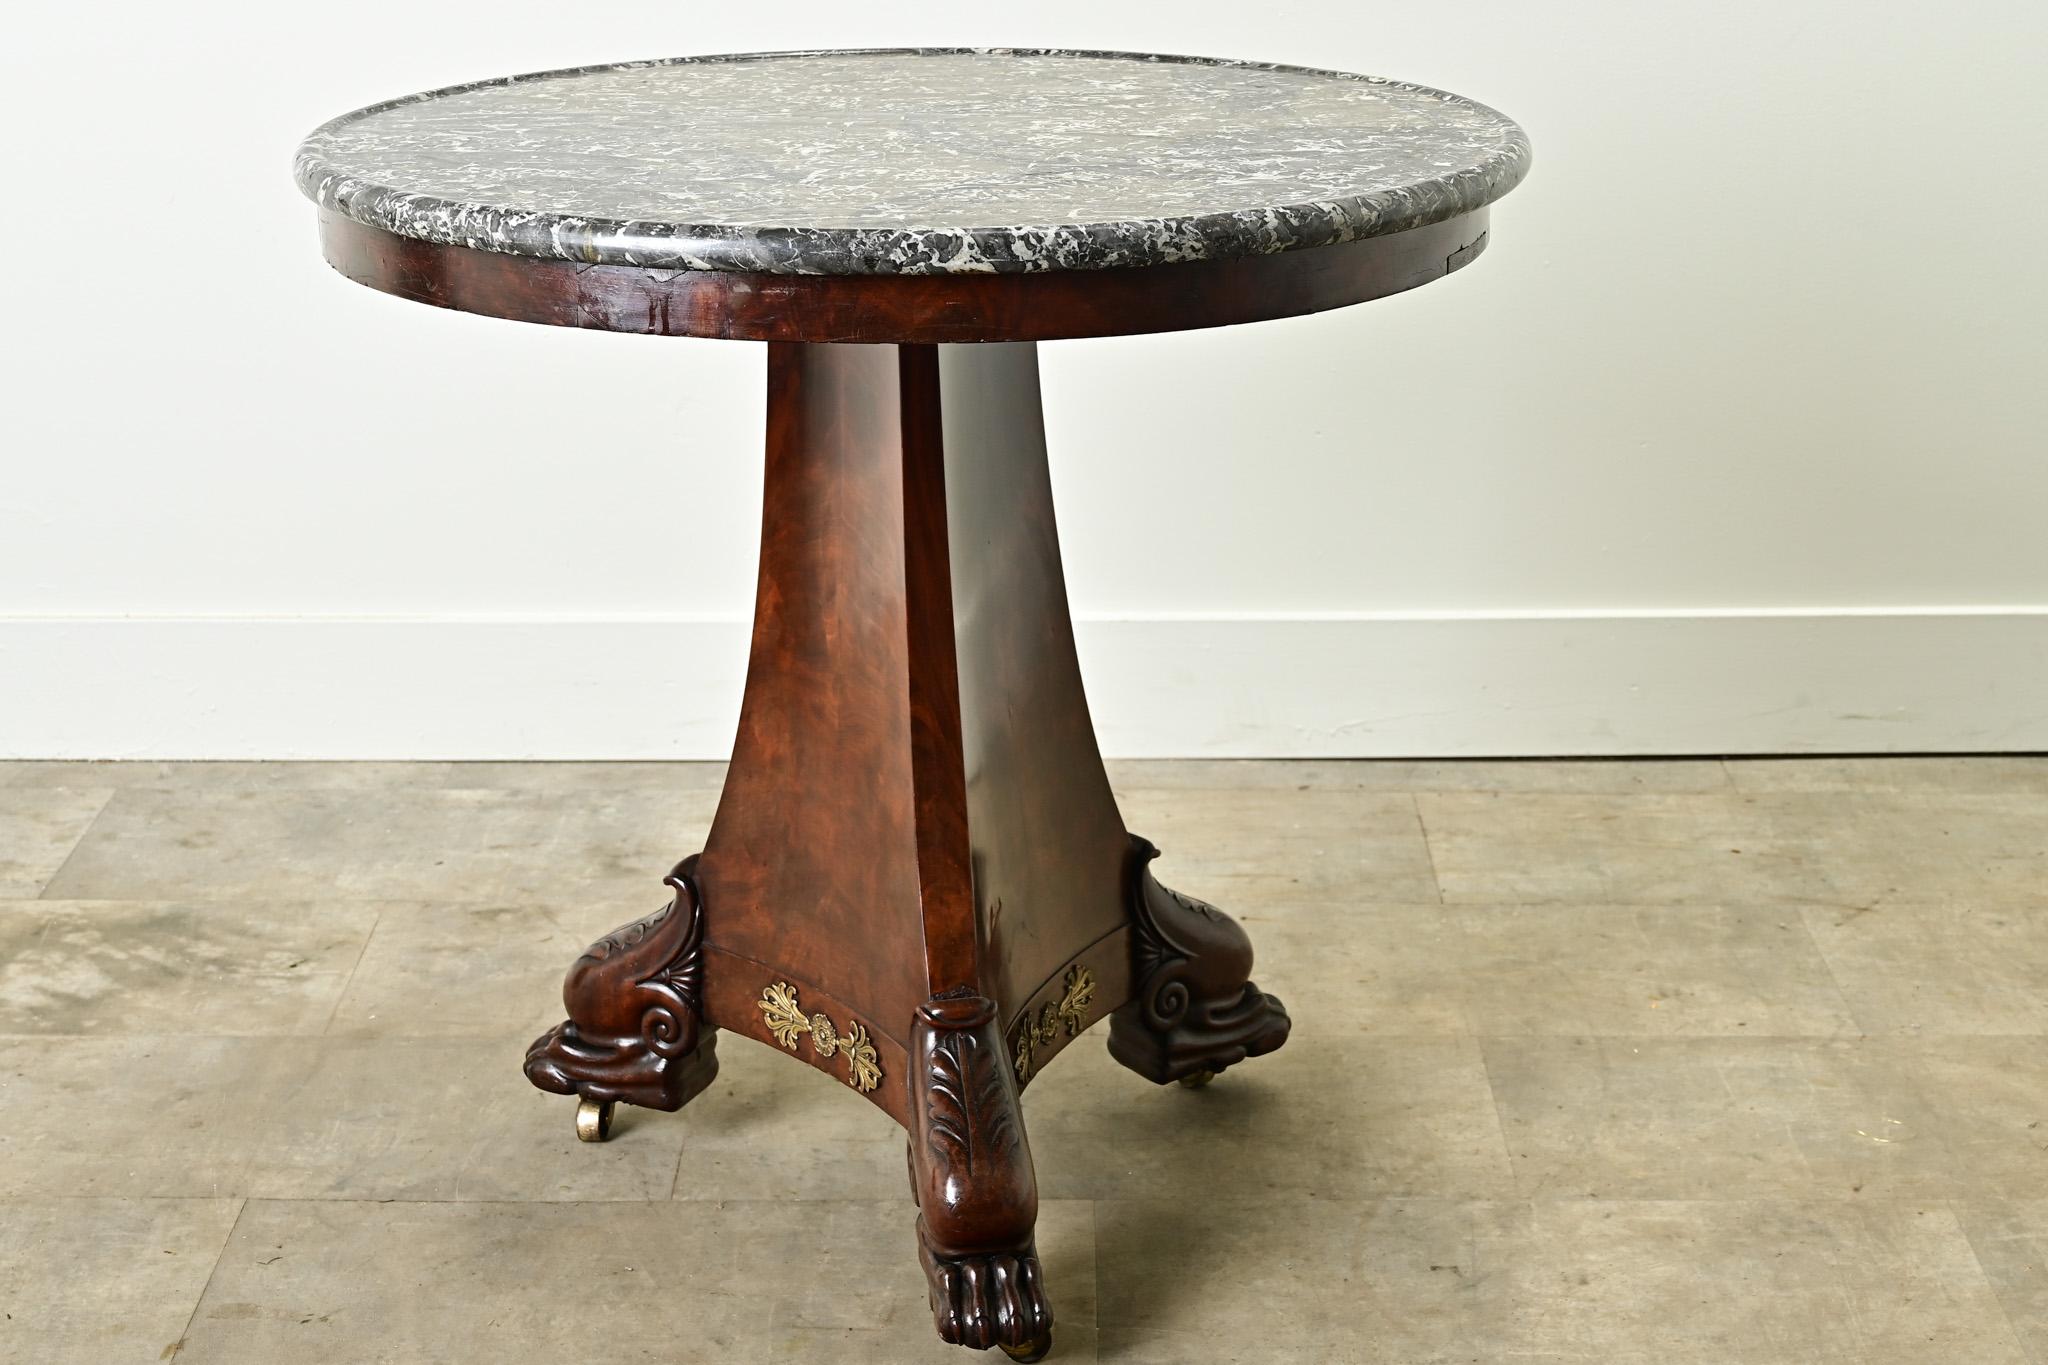 A handsome French Restauration center table made of burl mahogany. The original Saint Anne marble top rests above a three-sided concave mahogany base with gilt bronze ormolu. The original carved and decorative feet are lifted on casters. Cleaned and